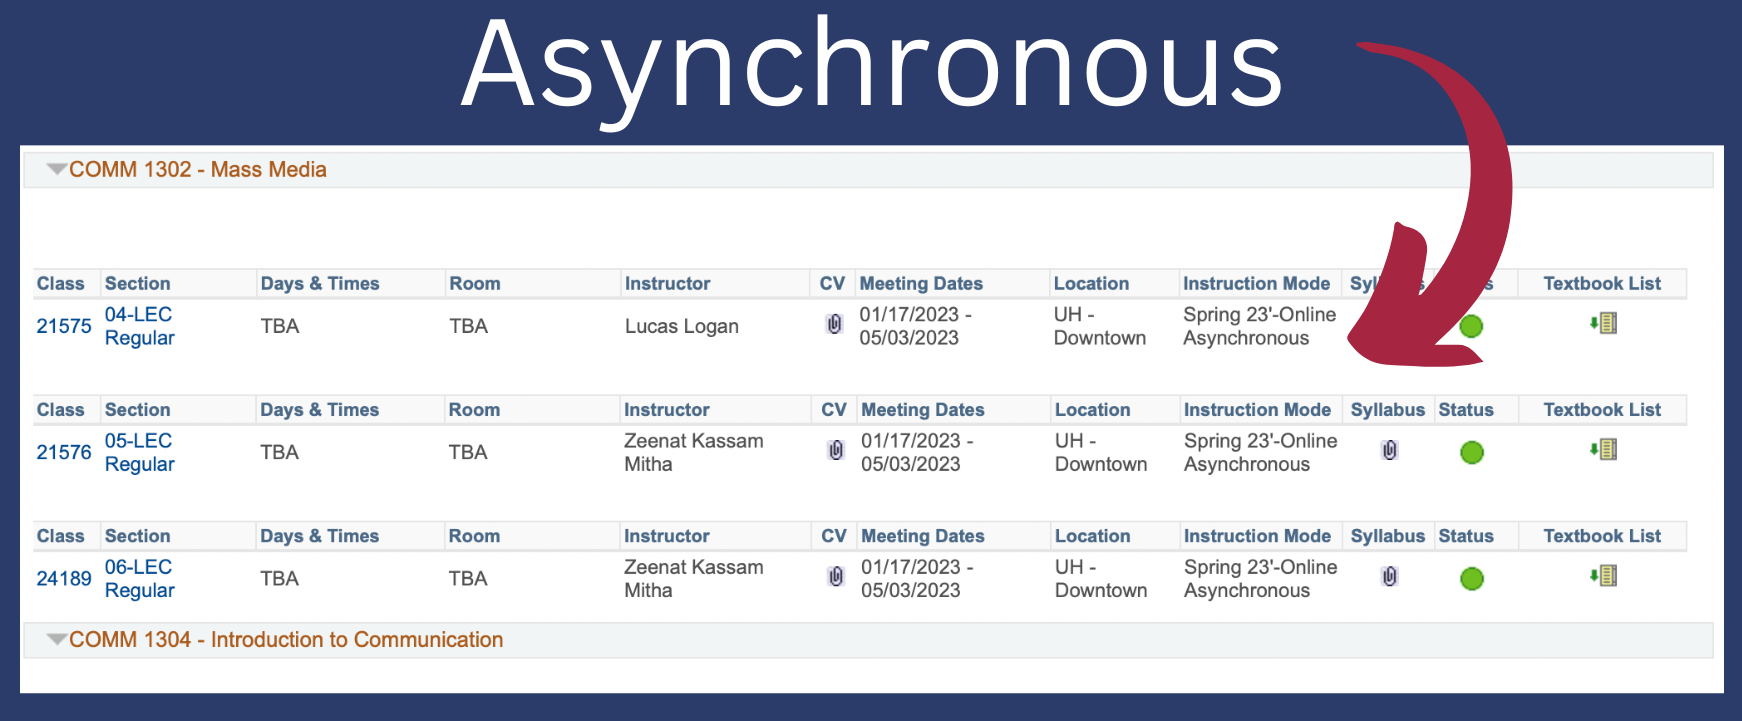 example of a class schedule with an online-asynchronous course